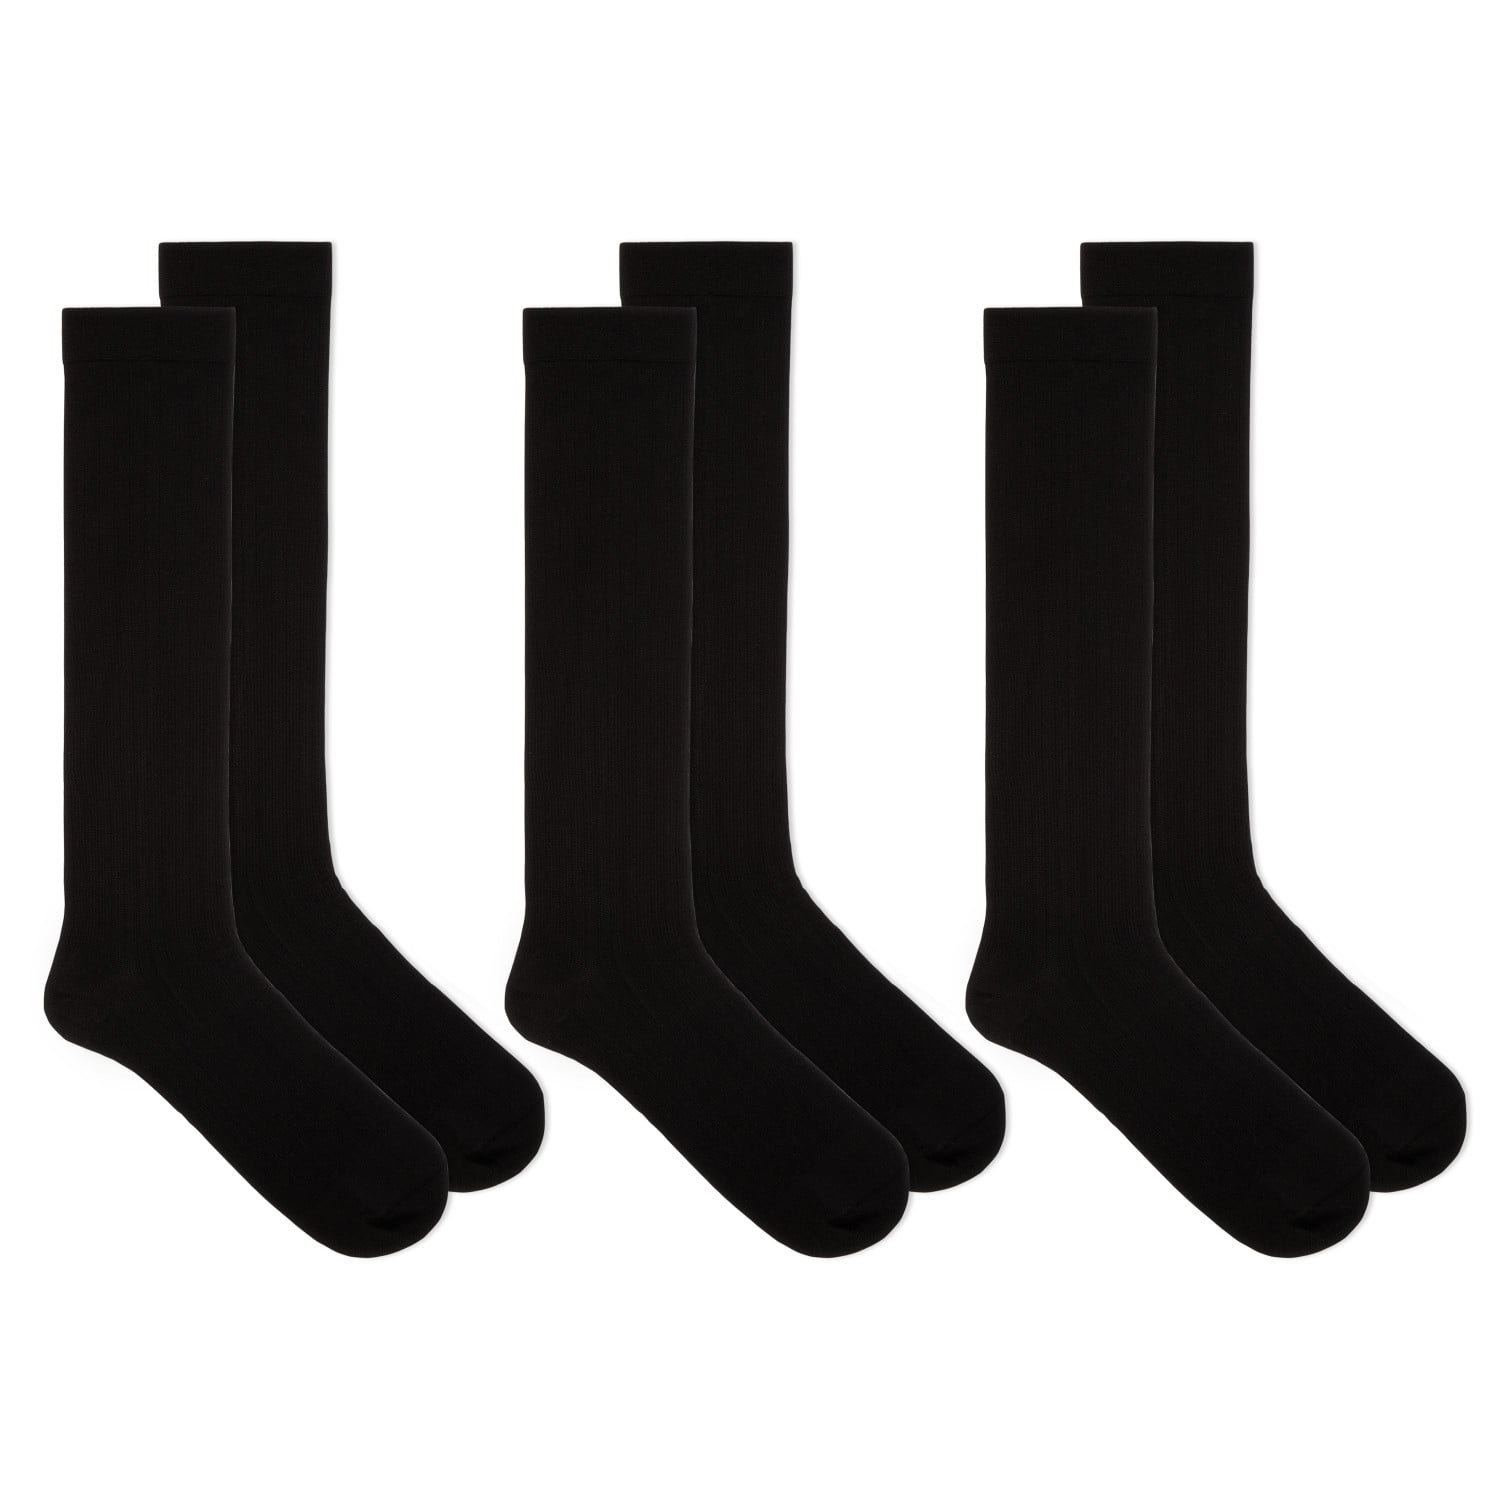 Dr. Scholl's Graduated Compression Unisex Post-Surgical Socks 15